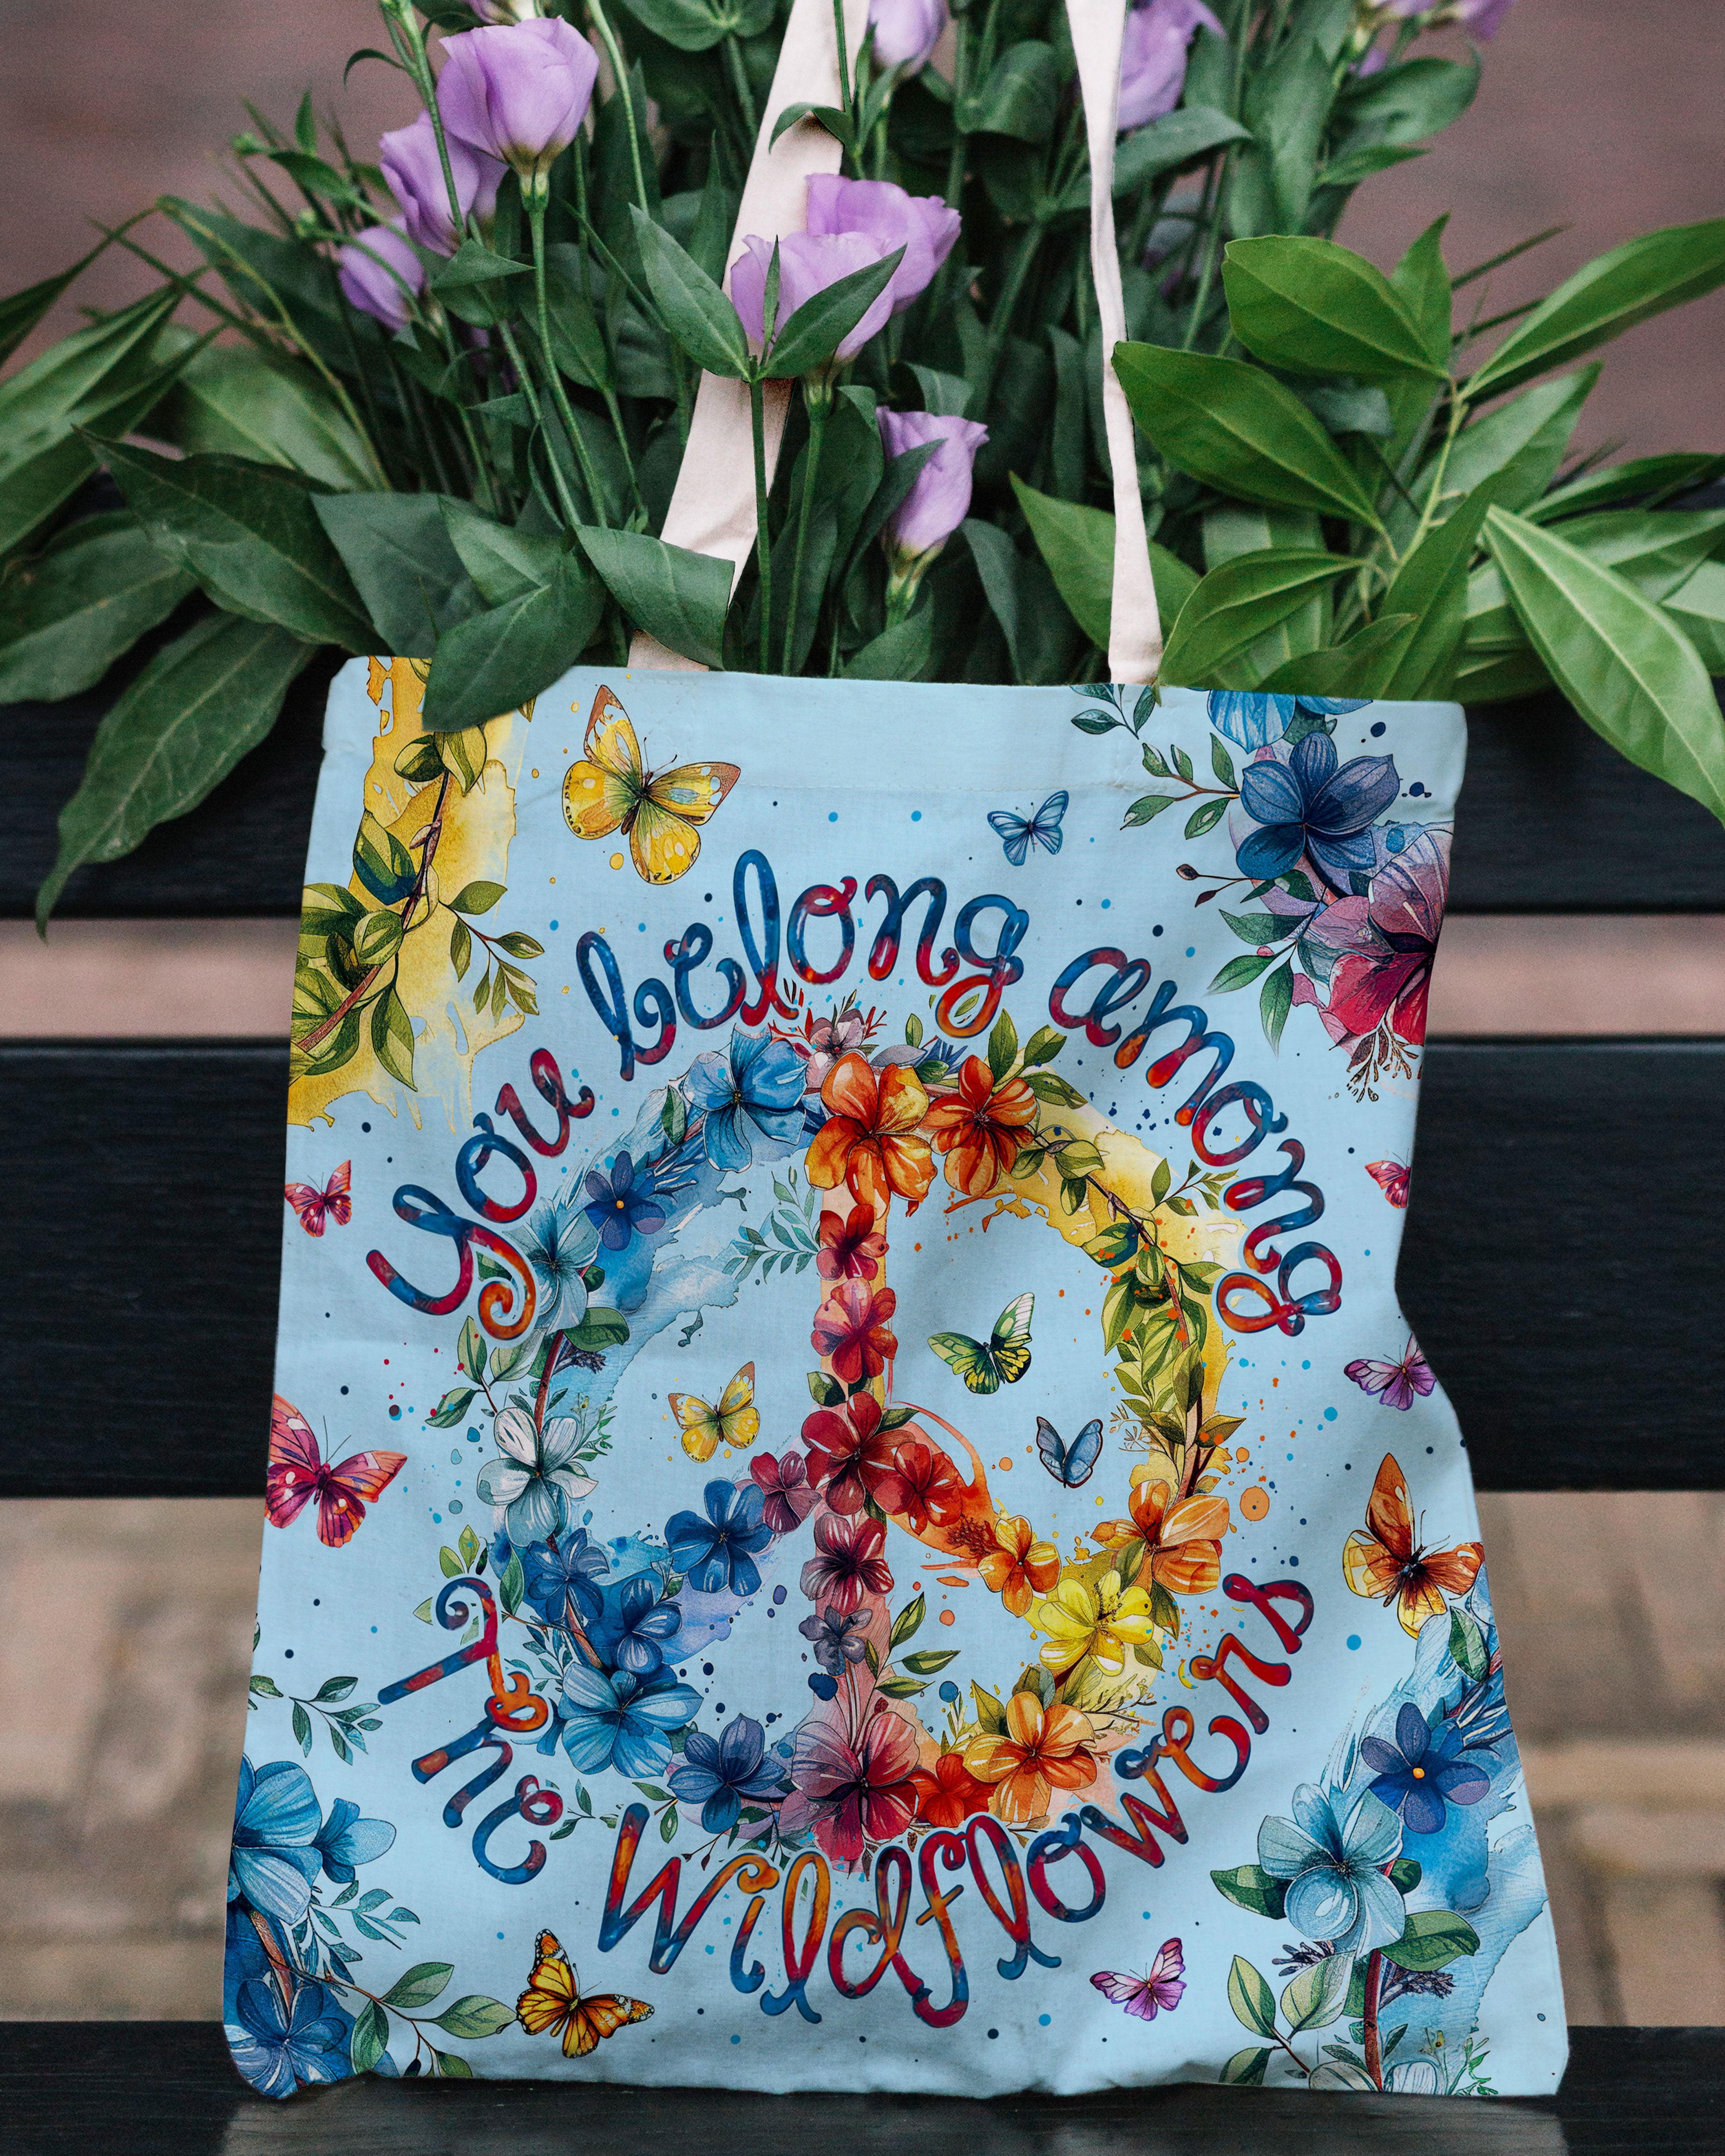 YOU BELONG AMONG THE WILDFLOWERS TOTE BAG - TY1405243